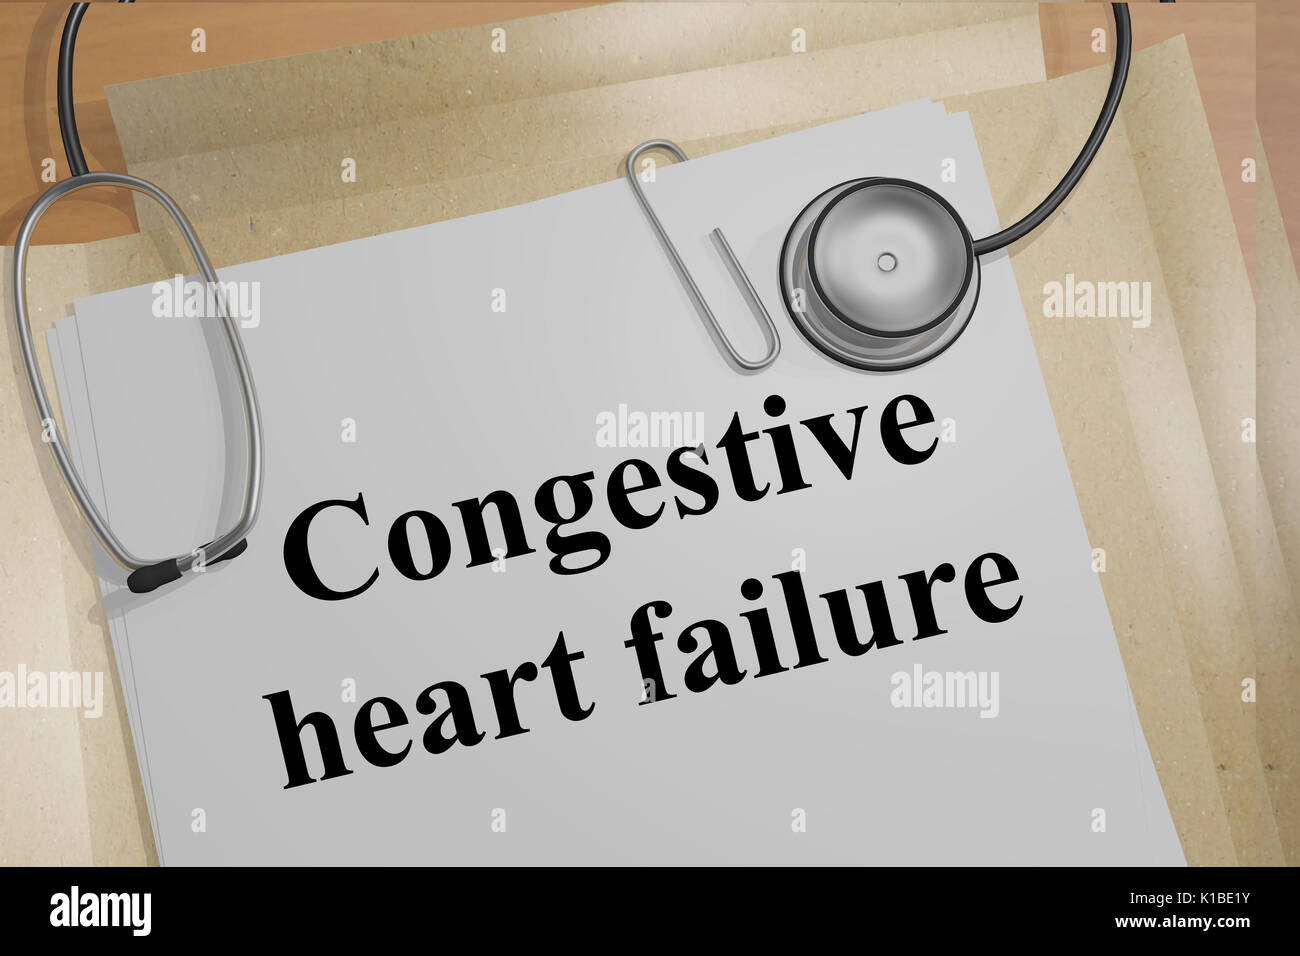 Render illustration of Congestive heart failure title on Medical Documents Stock Photo